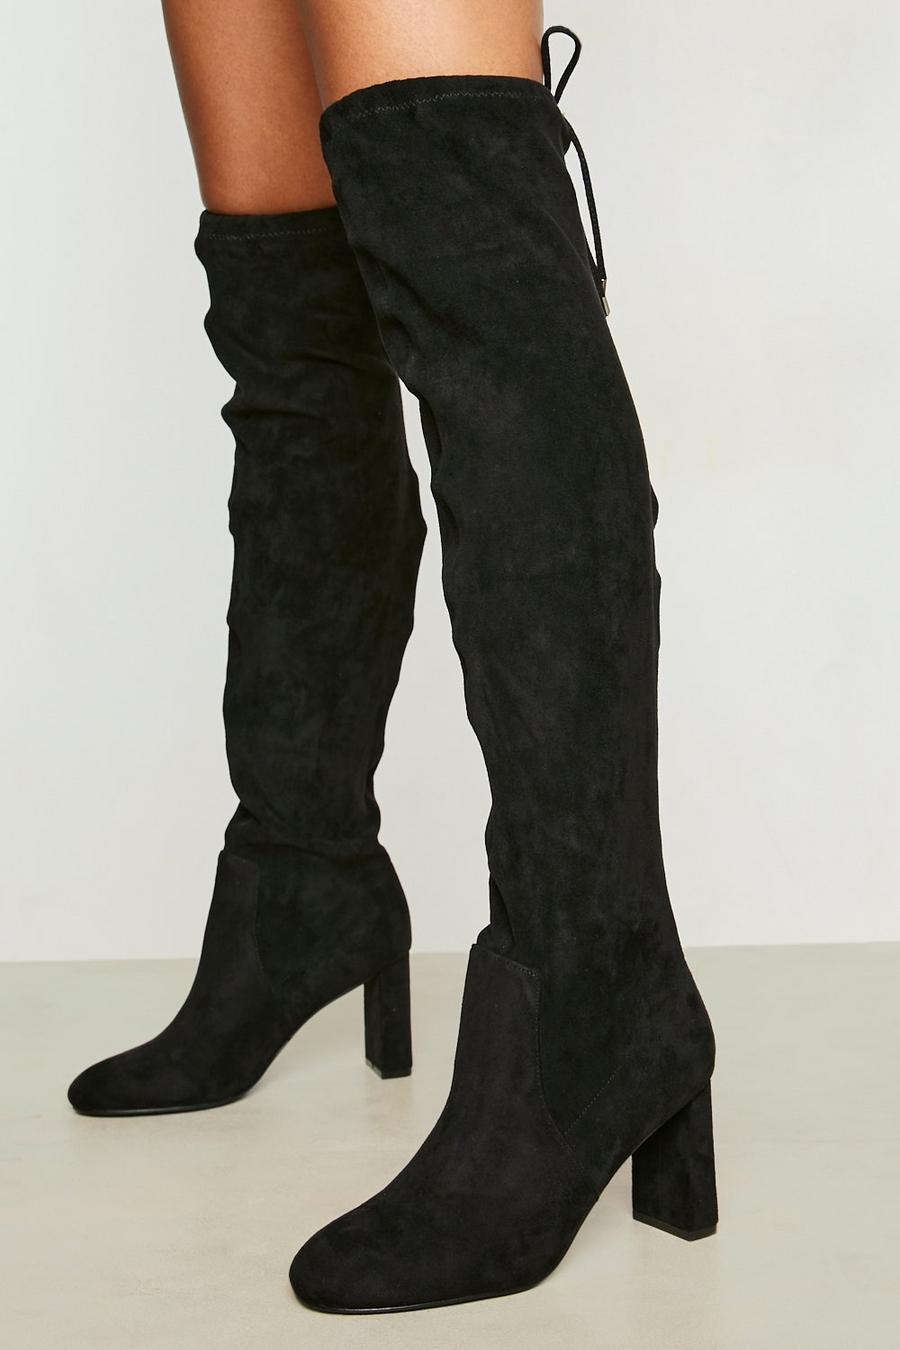 Black negro Flat Heel Round Over The Knee Stretch Boots